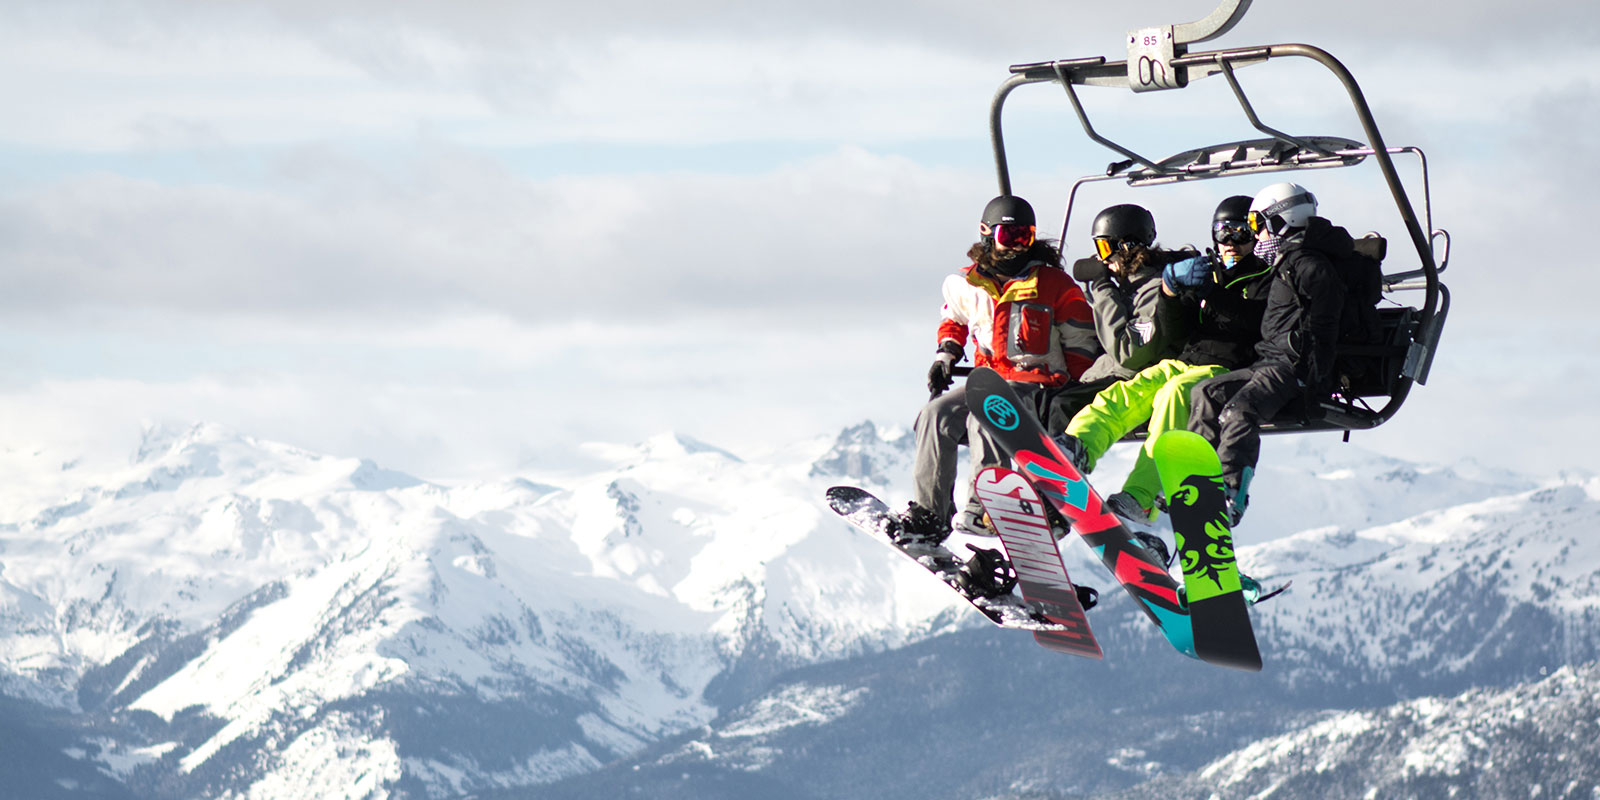 Four snowboarders on ski lift chair with view of snow capped mountains